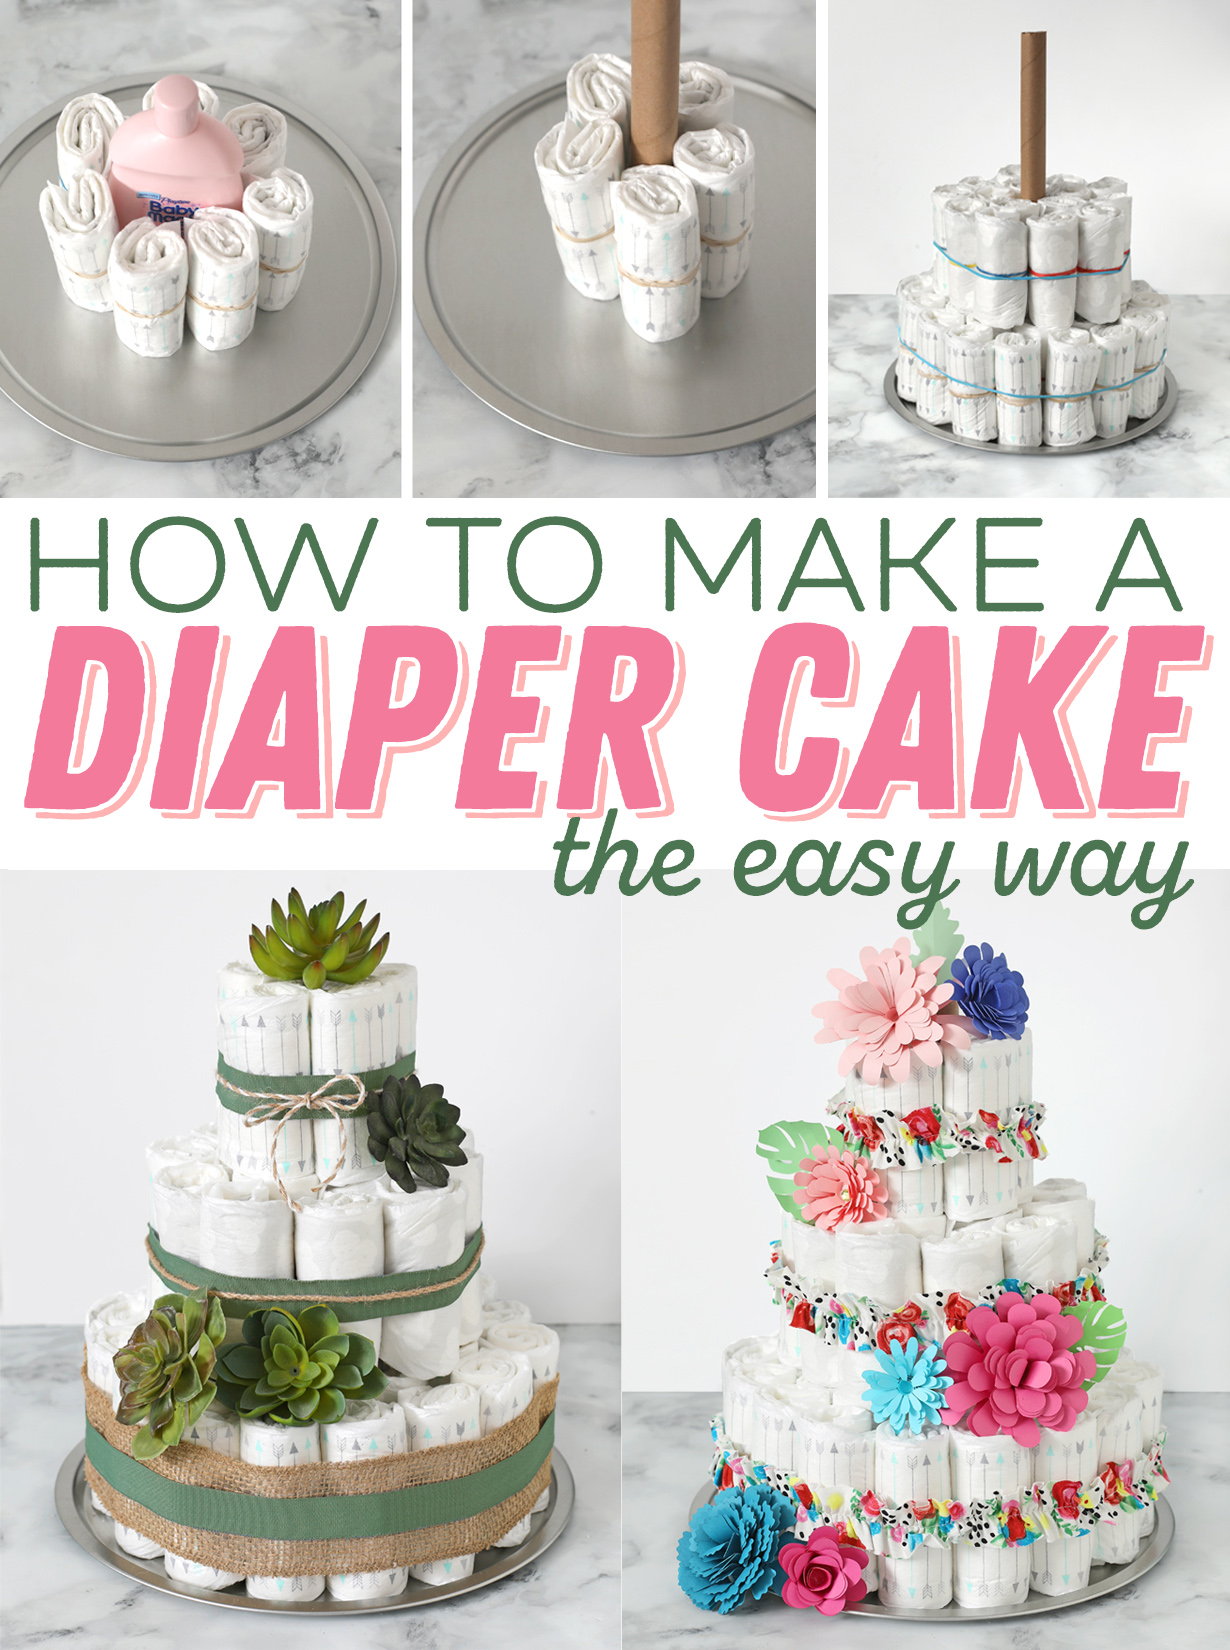 Unique Handcrafted Diaper Cakes New Mom's Love